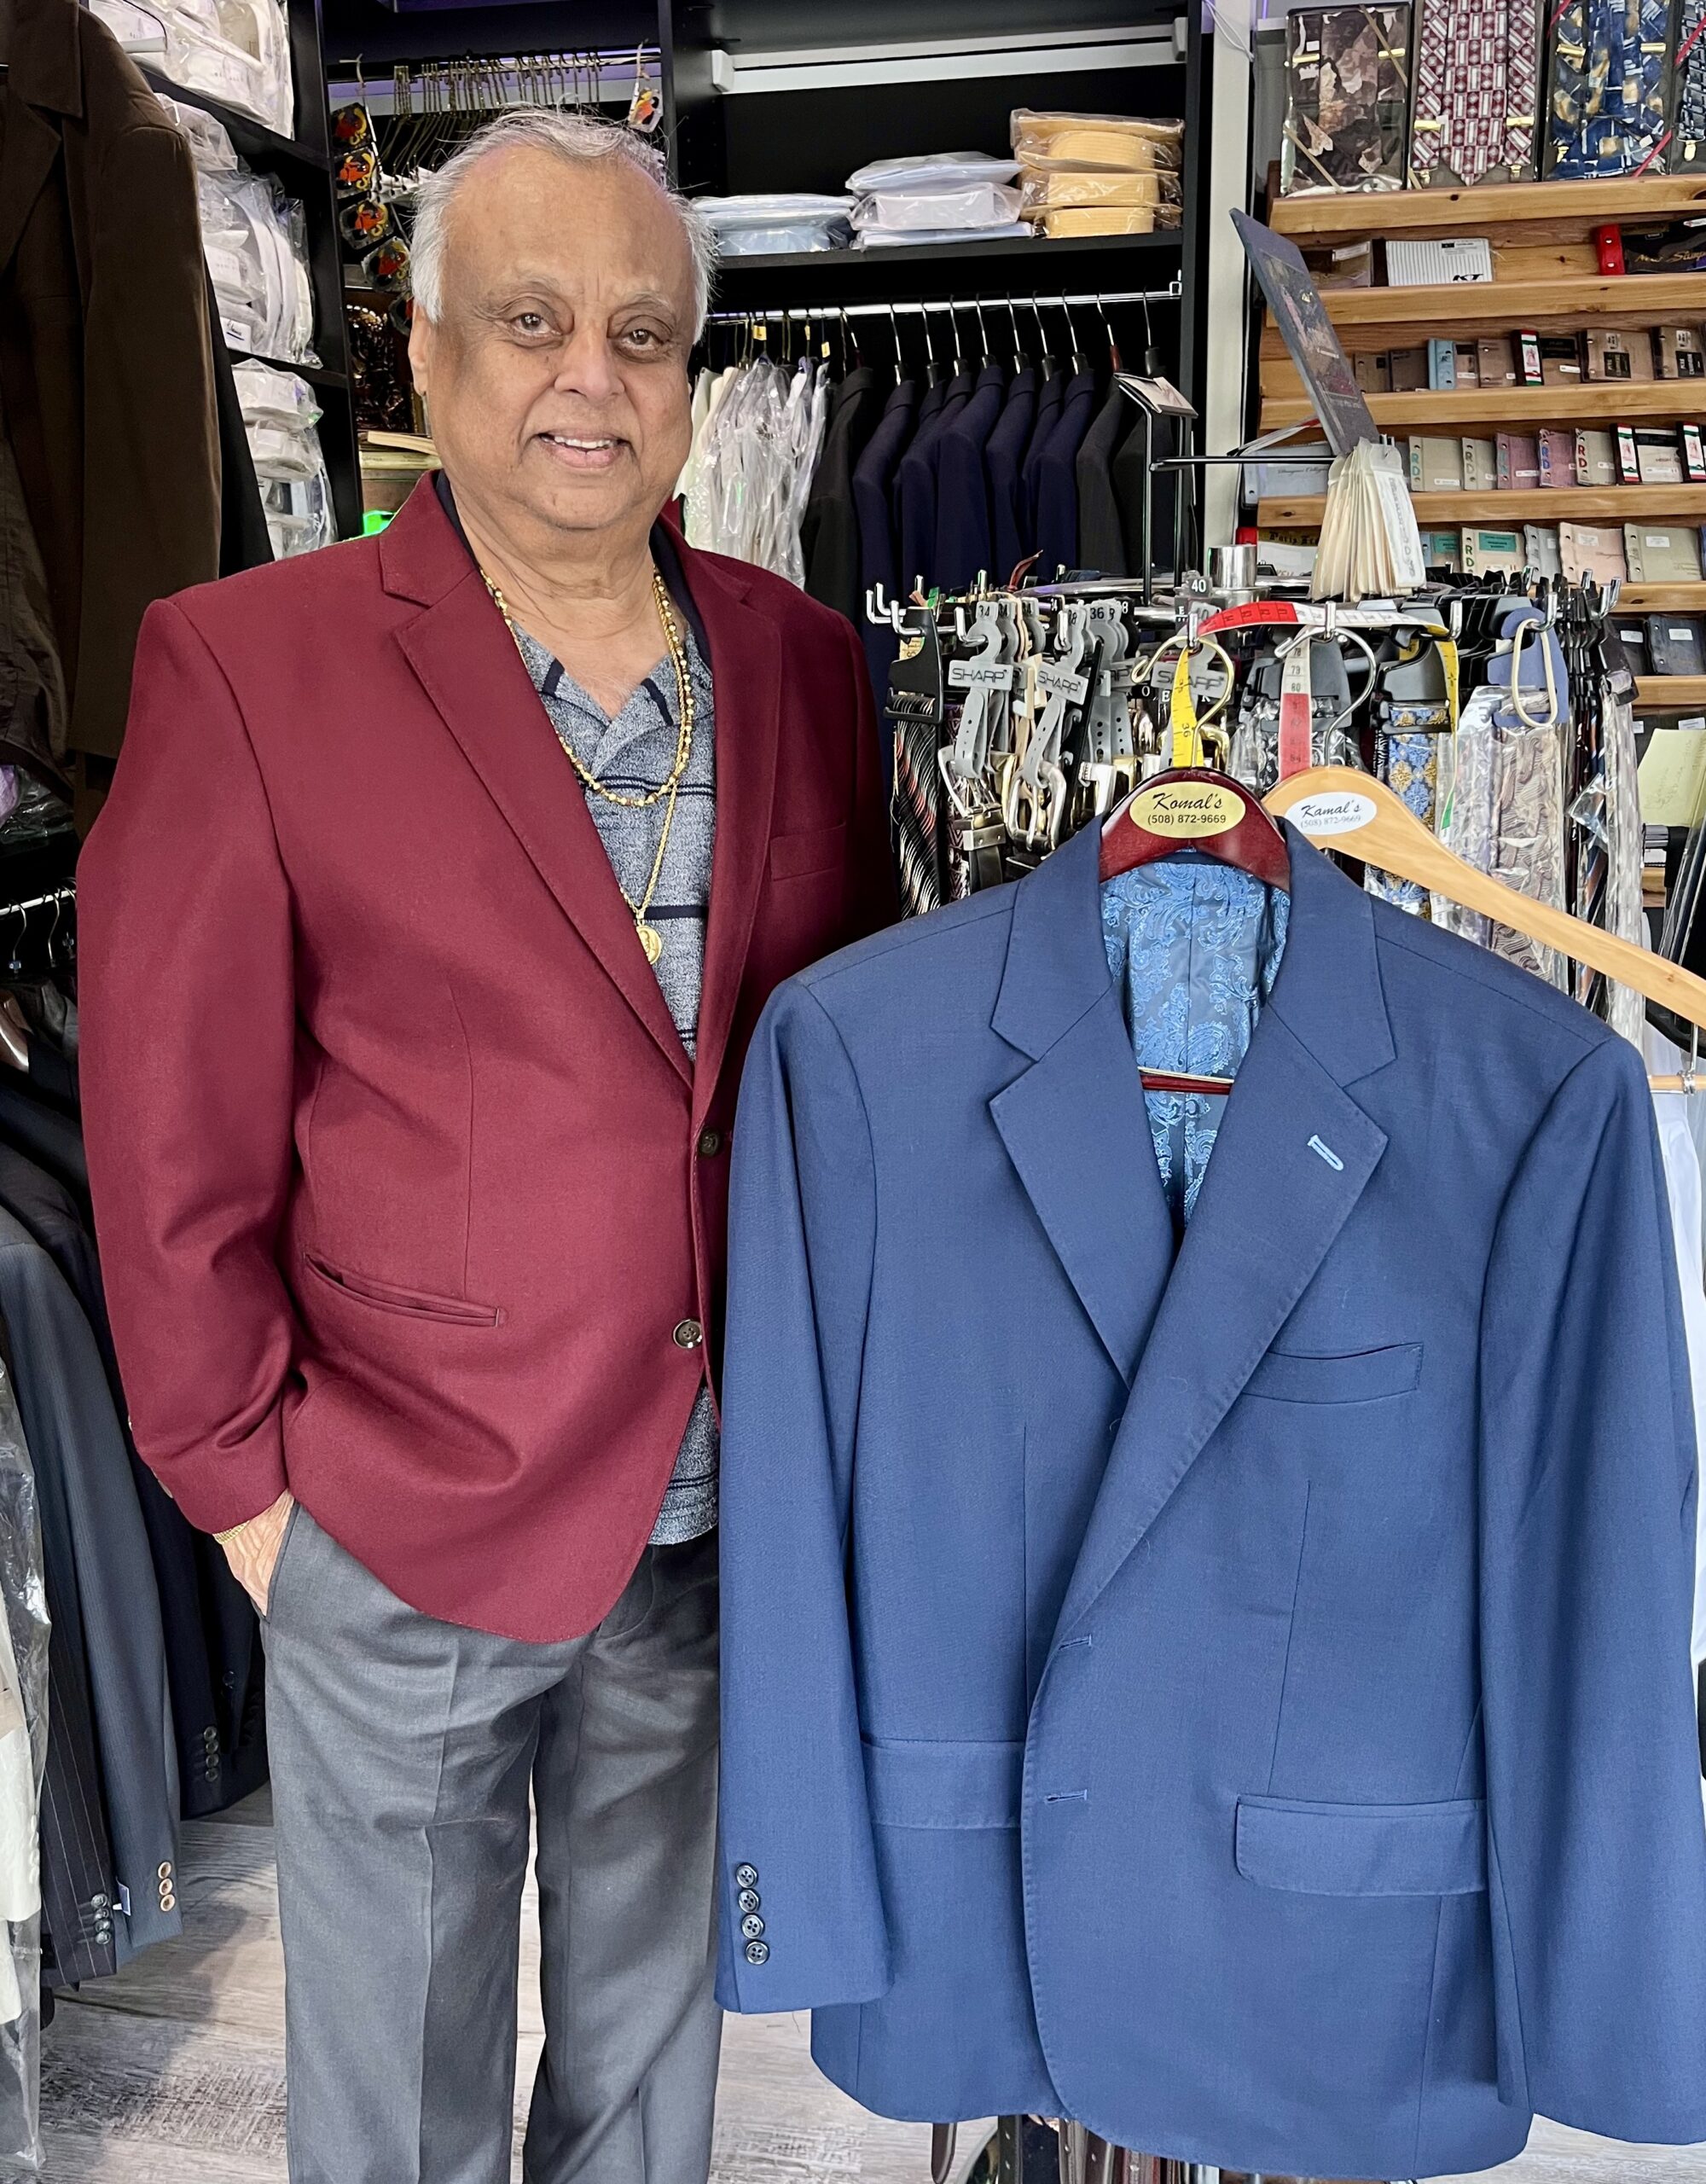 Business Profile: Craftsmanship at Komal’s Suits delivers one-of-a-kind apparel